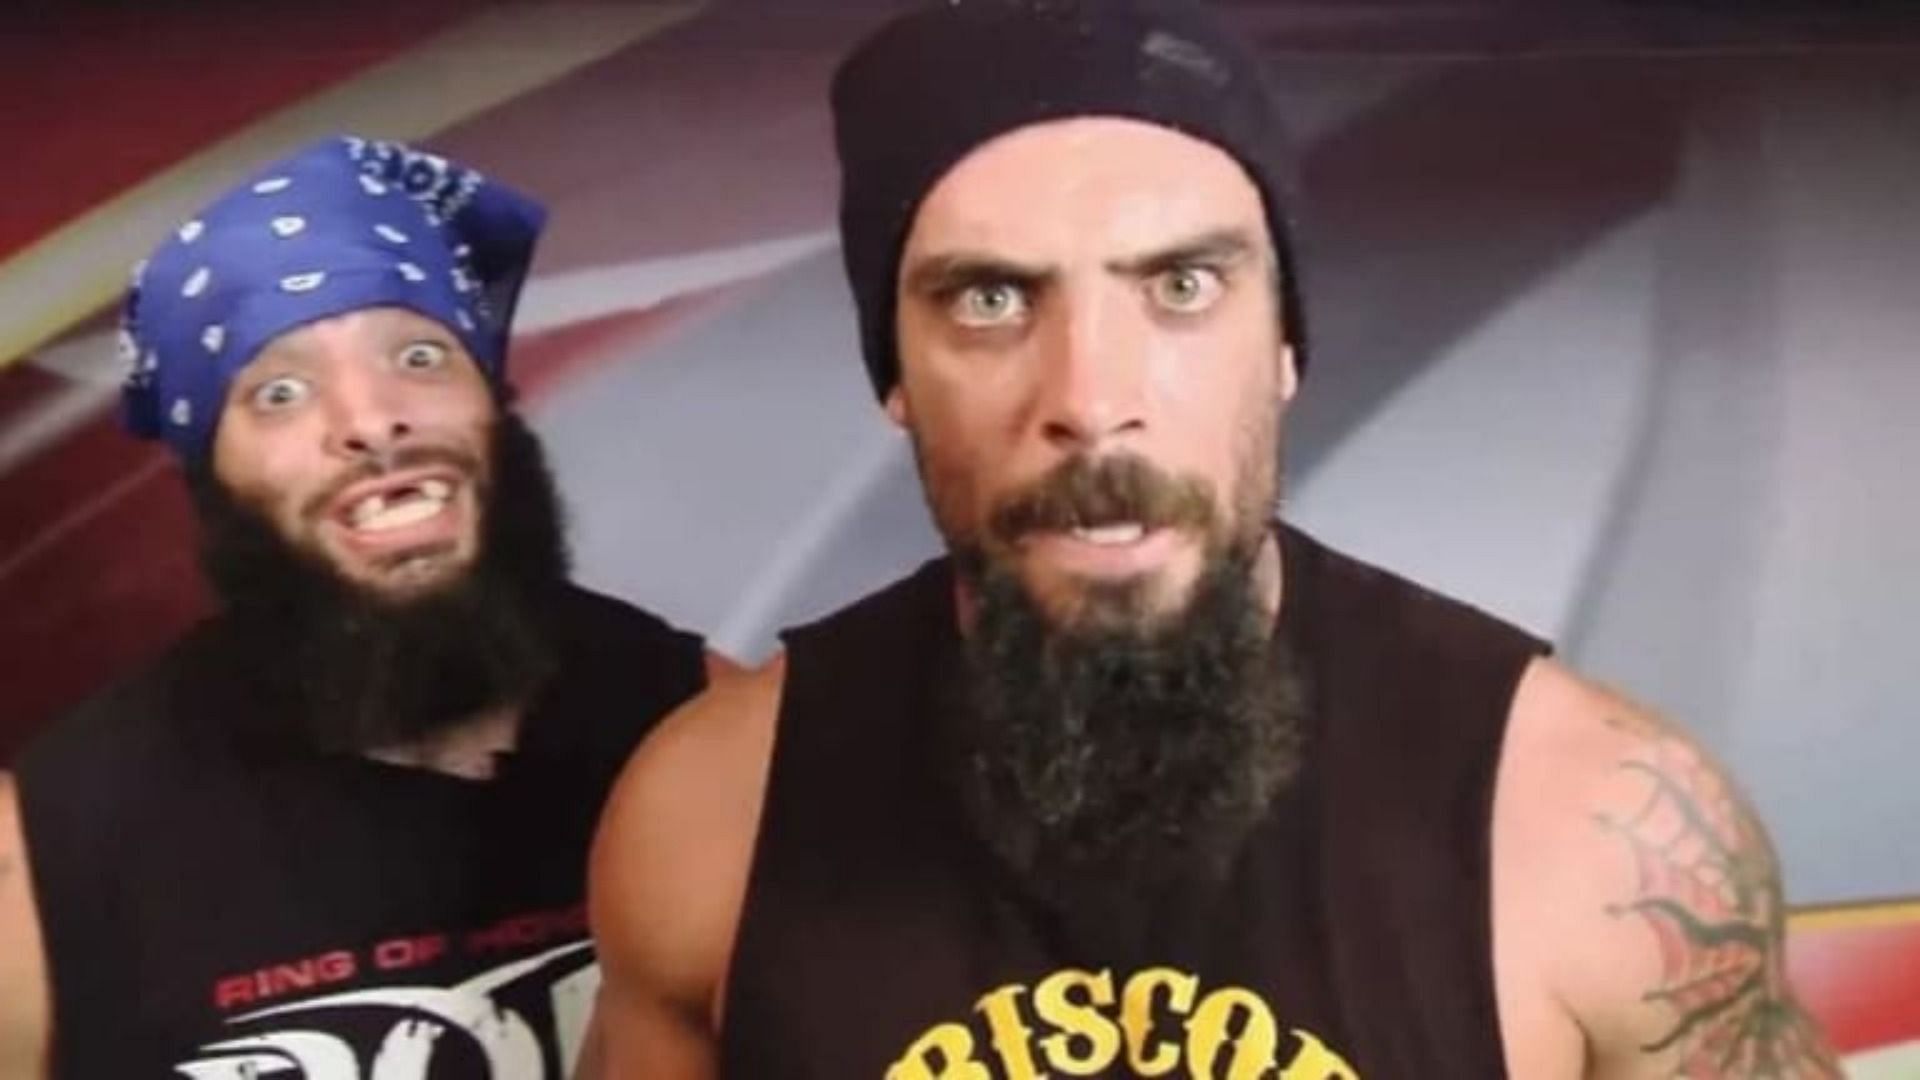 WWE went out of their way to pay tribute to Jay Briscoe.